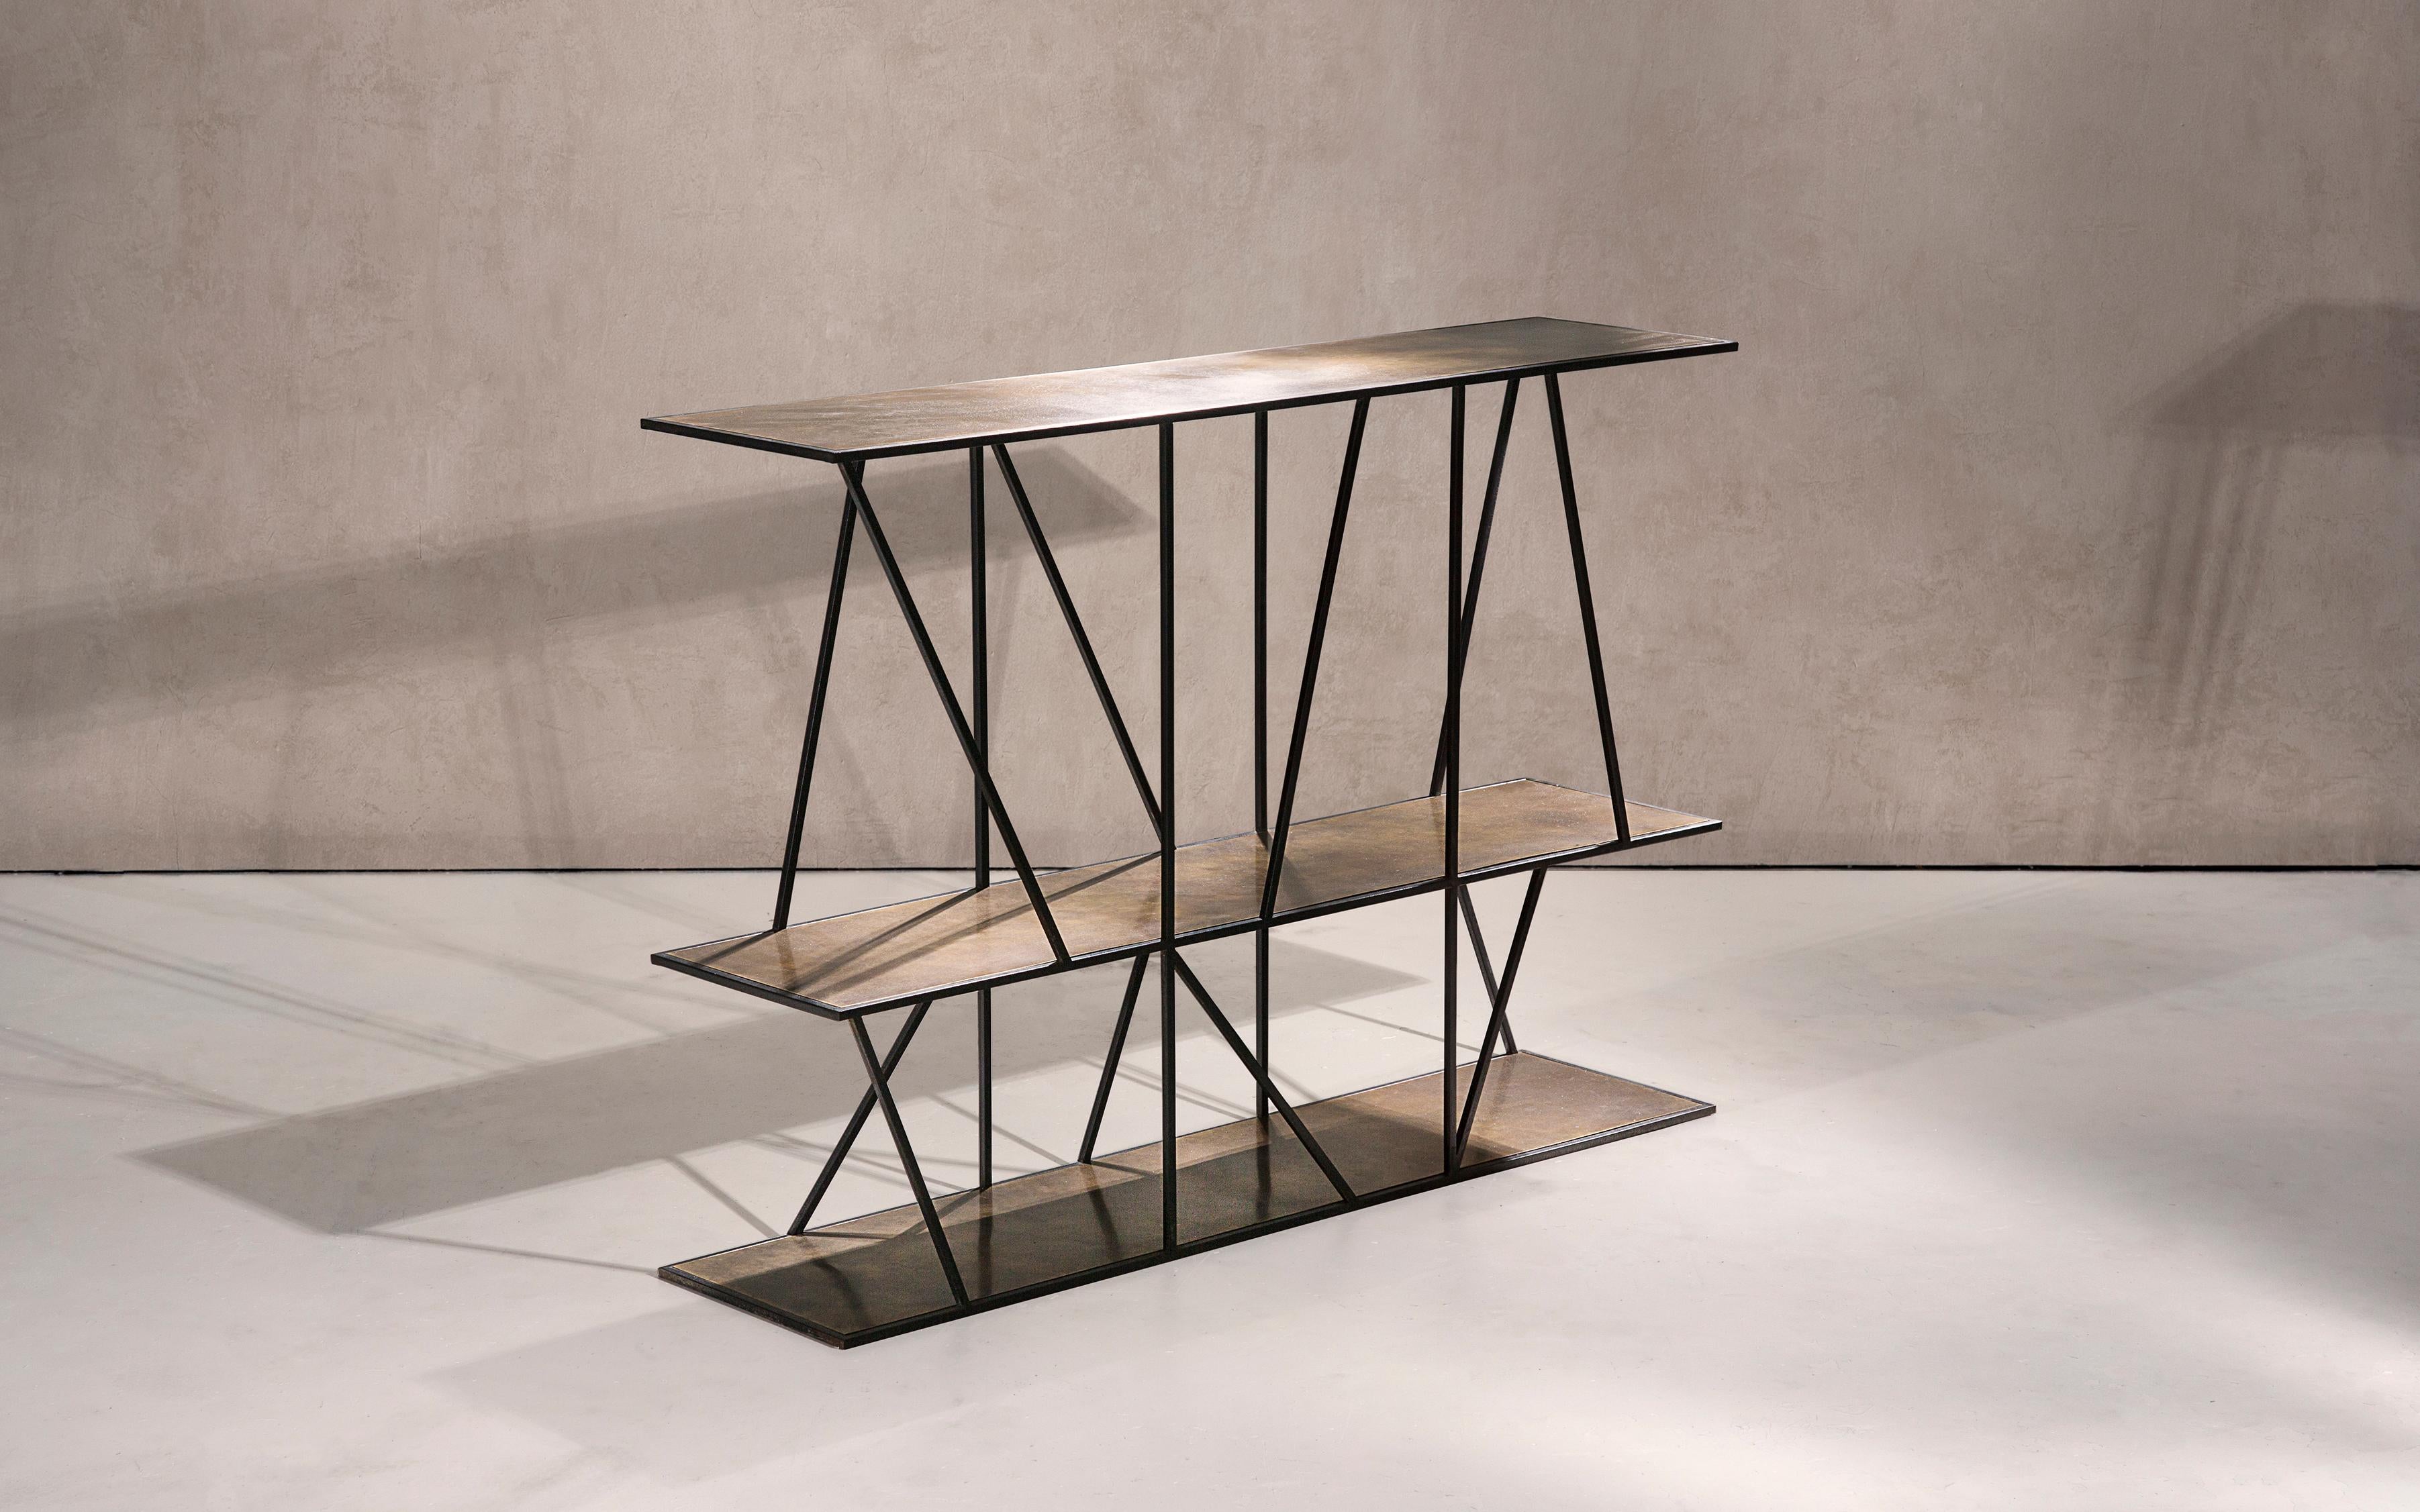 Medium Staiths Handcrafted console signed by Novocastrian
Materials: Patinated Brass
Dimensions: 150L x 30W x 80H
Custom sizes and finishes are available.

A sculptural console table in black patinated steel and patinated brass. Handcrafted in the